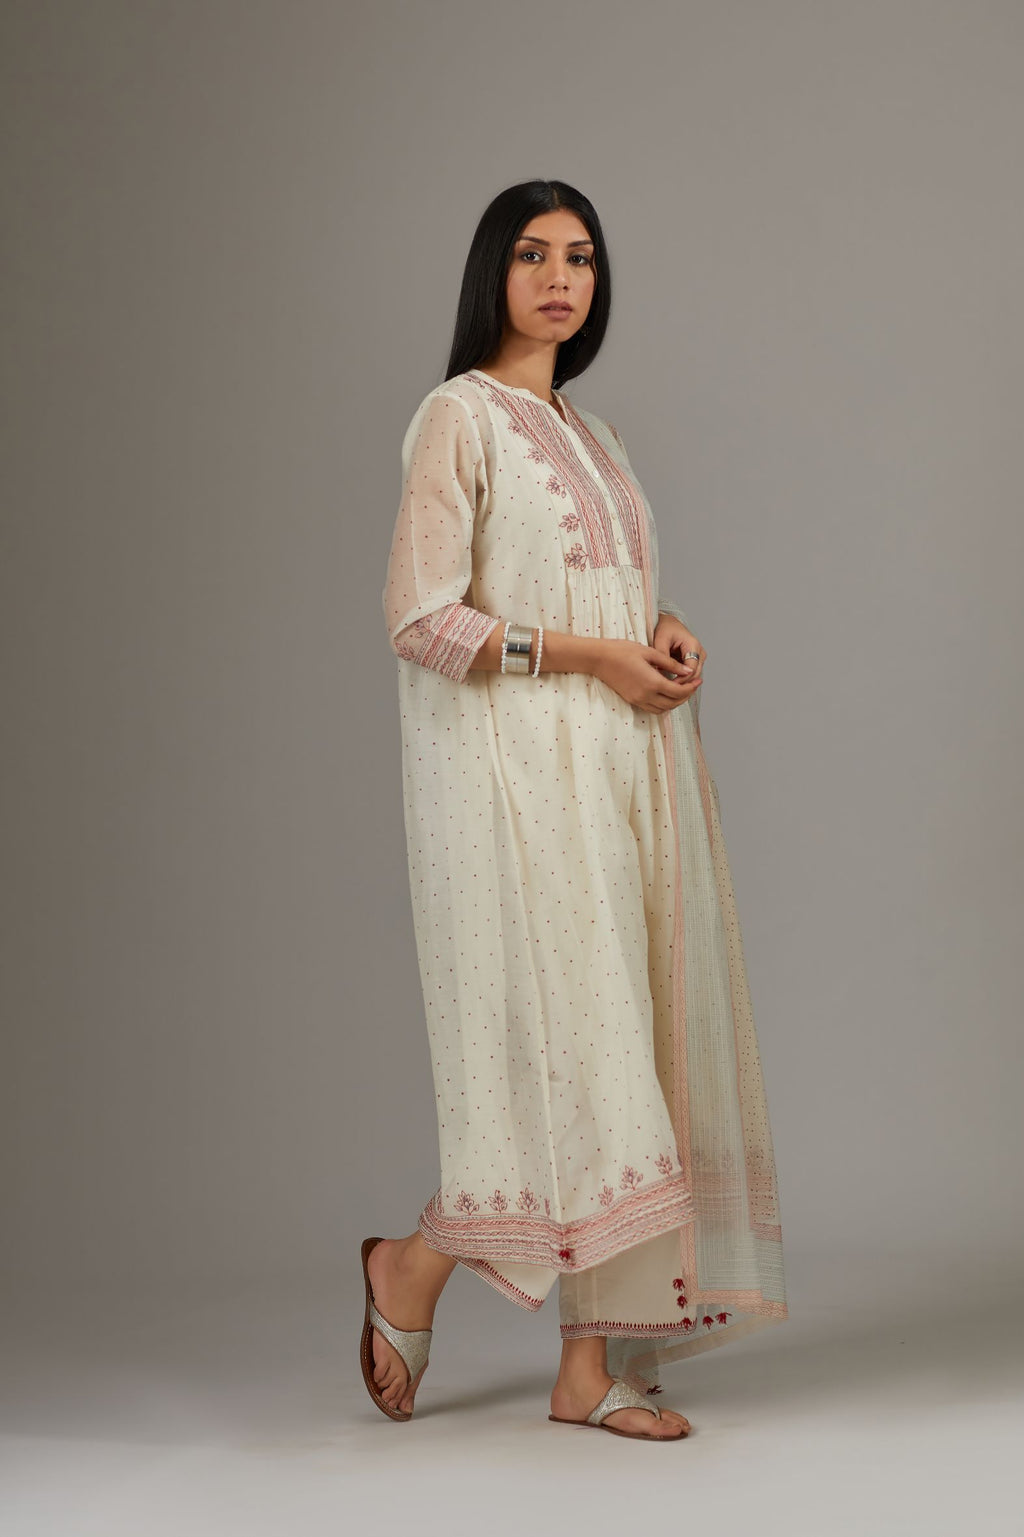 Hand block printed kurta set  dress with quilted, embroidered yoke with fine gathers.